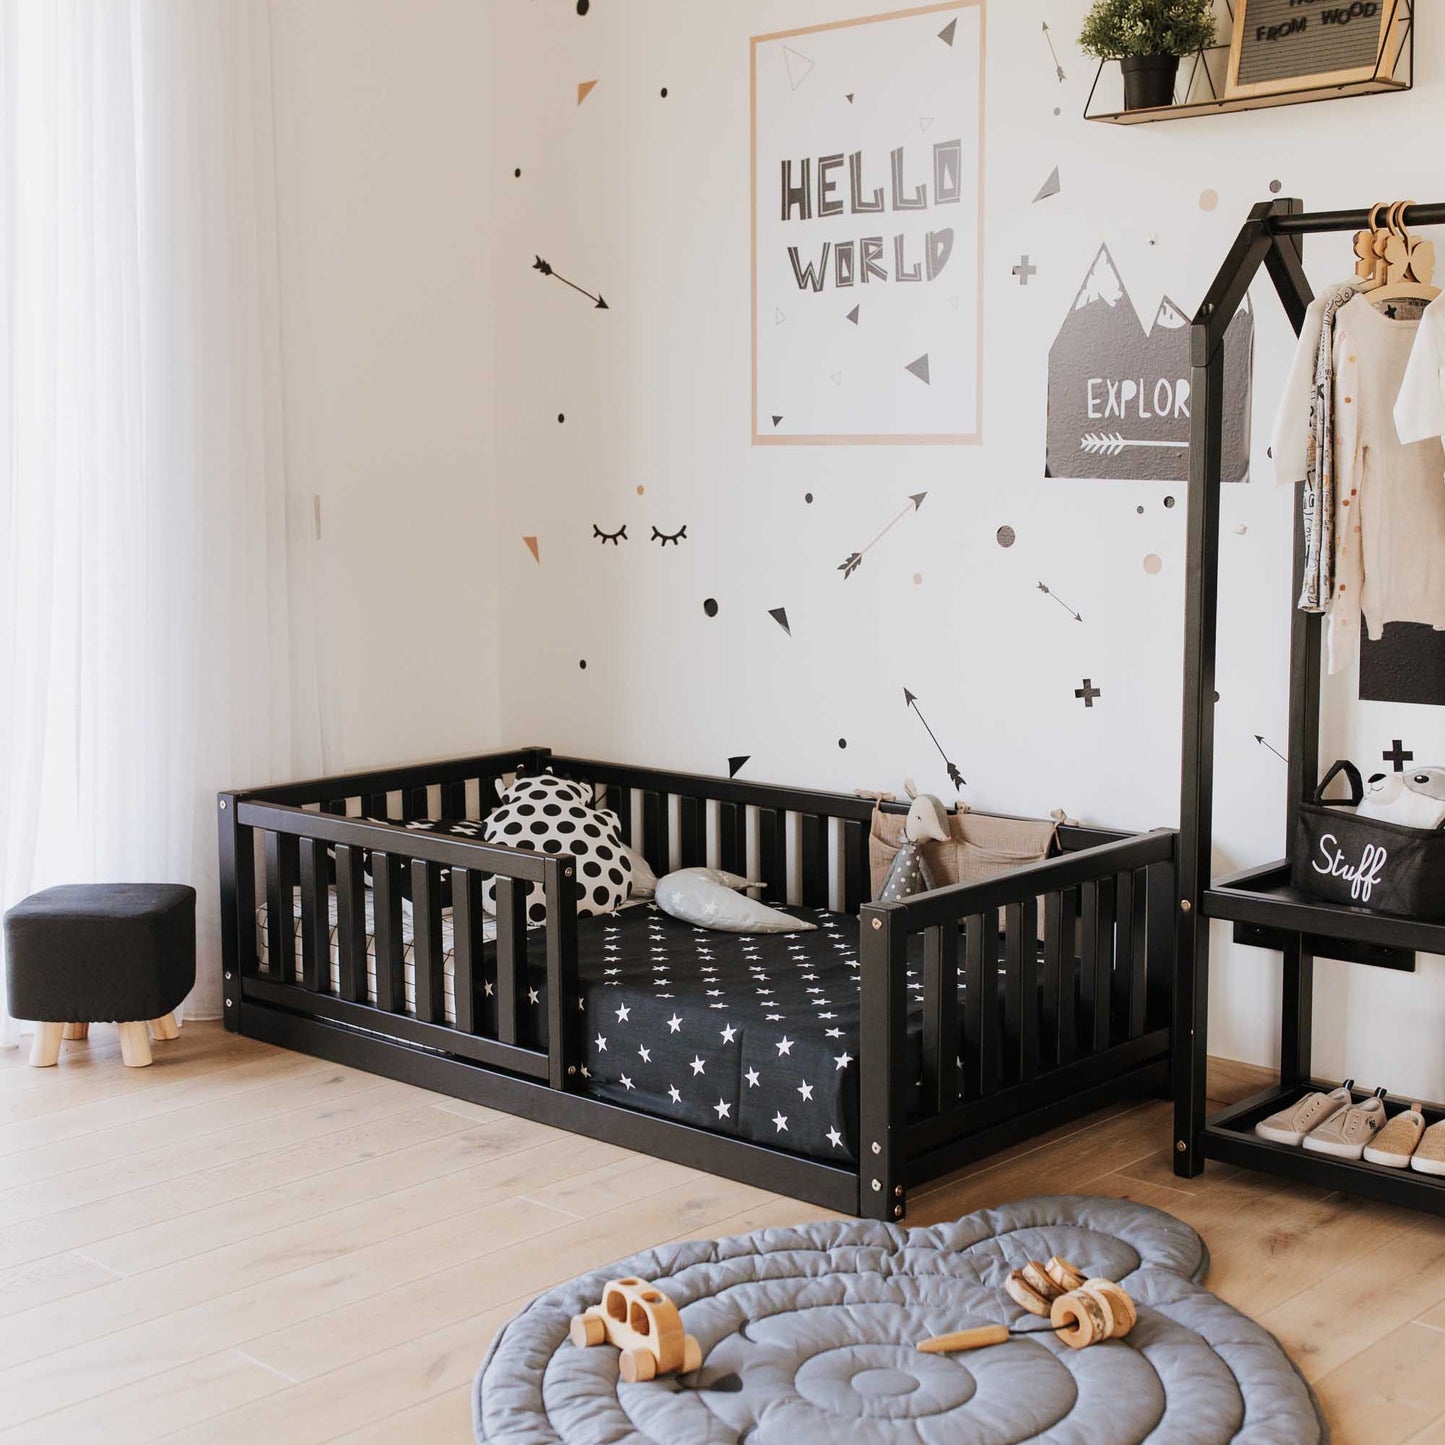 A child's room with a Sweet Home From Wood Montessori kids' bed with a fence and polka dot wall decals, providing independent sleeping and security.